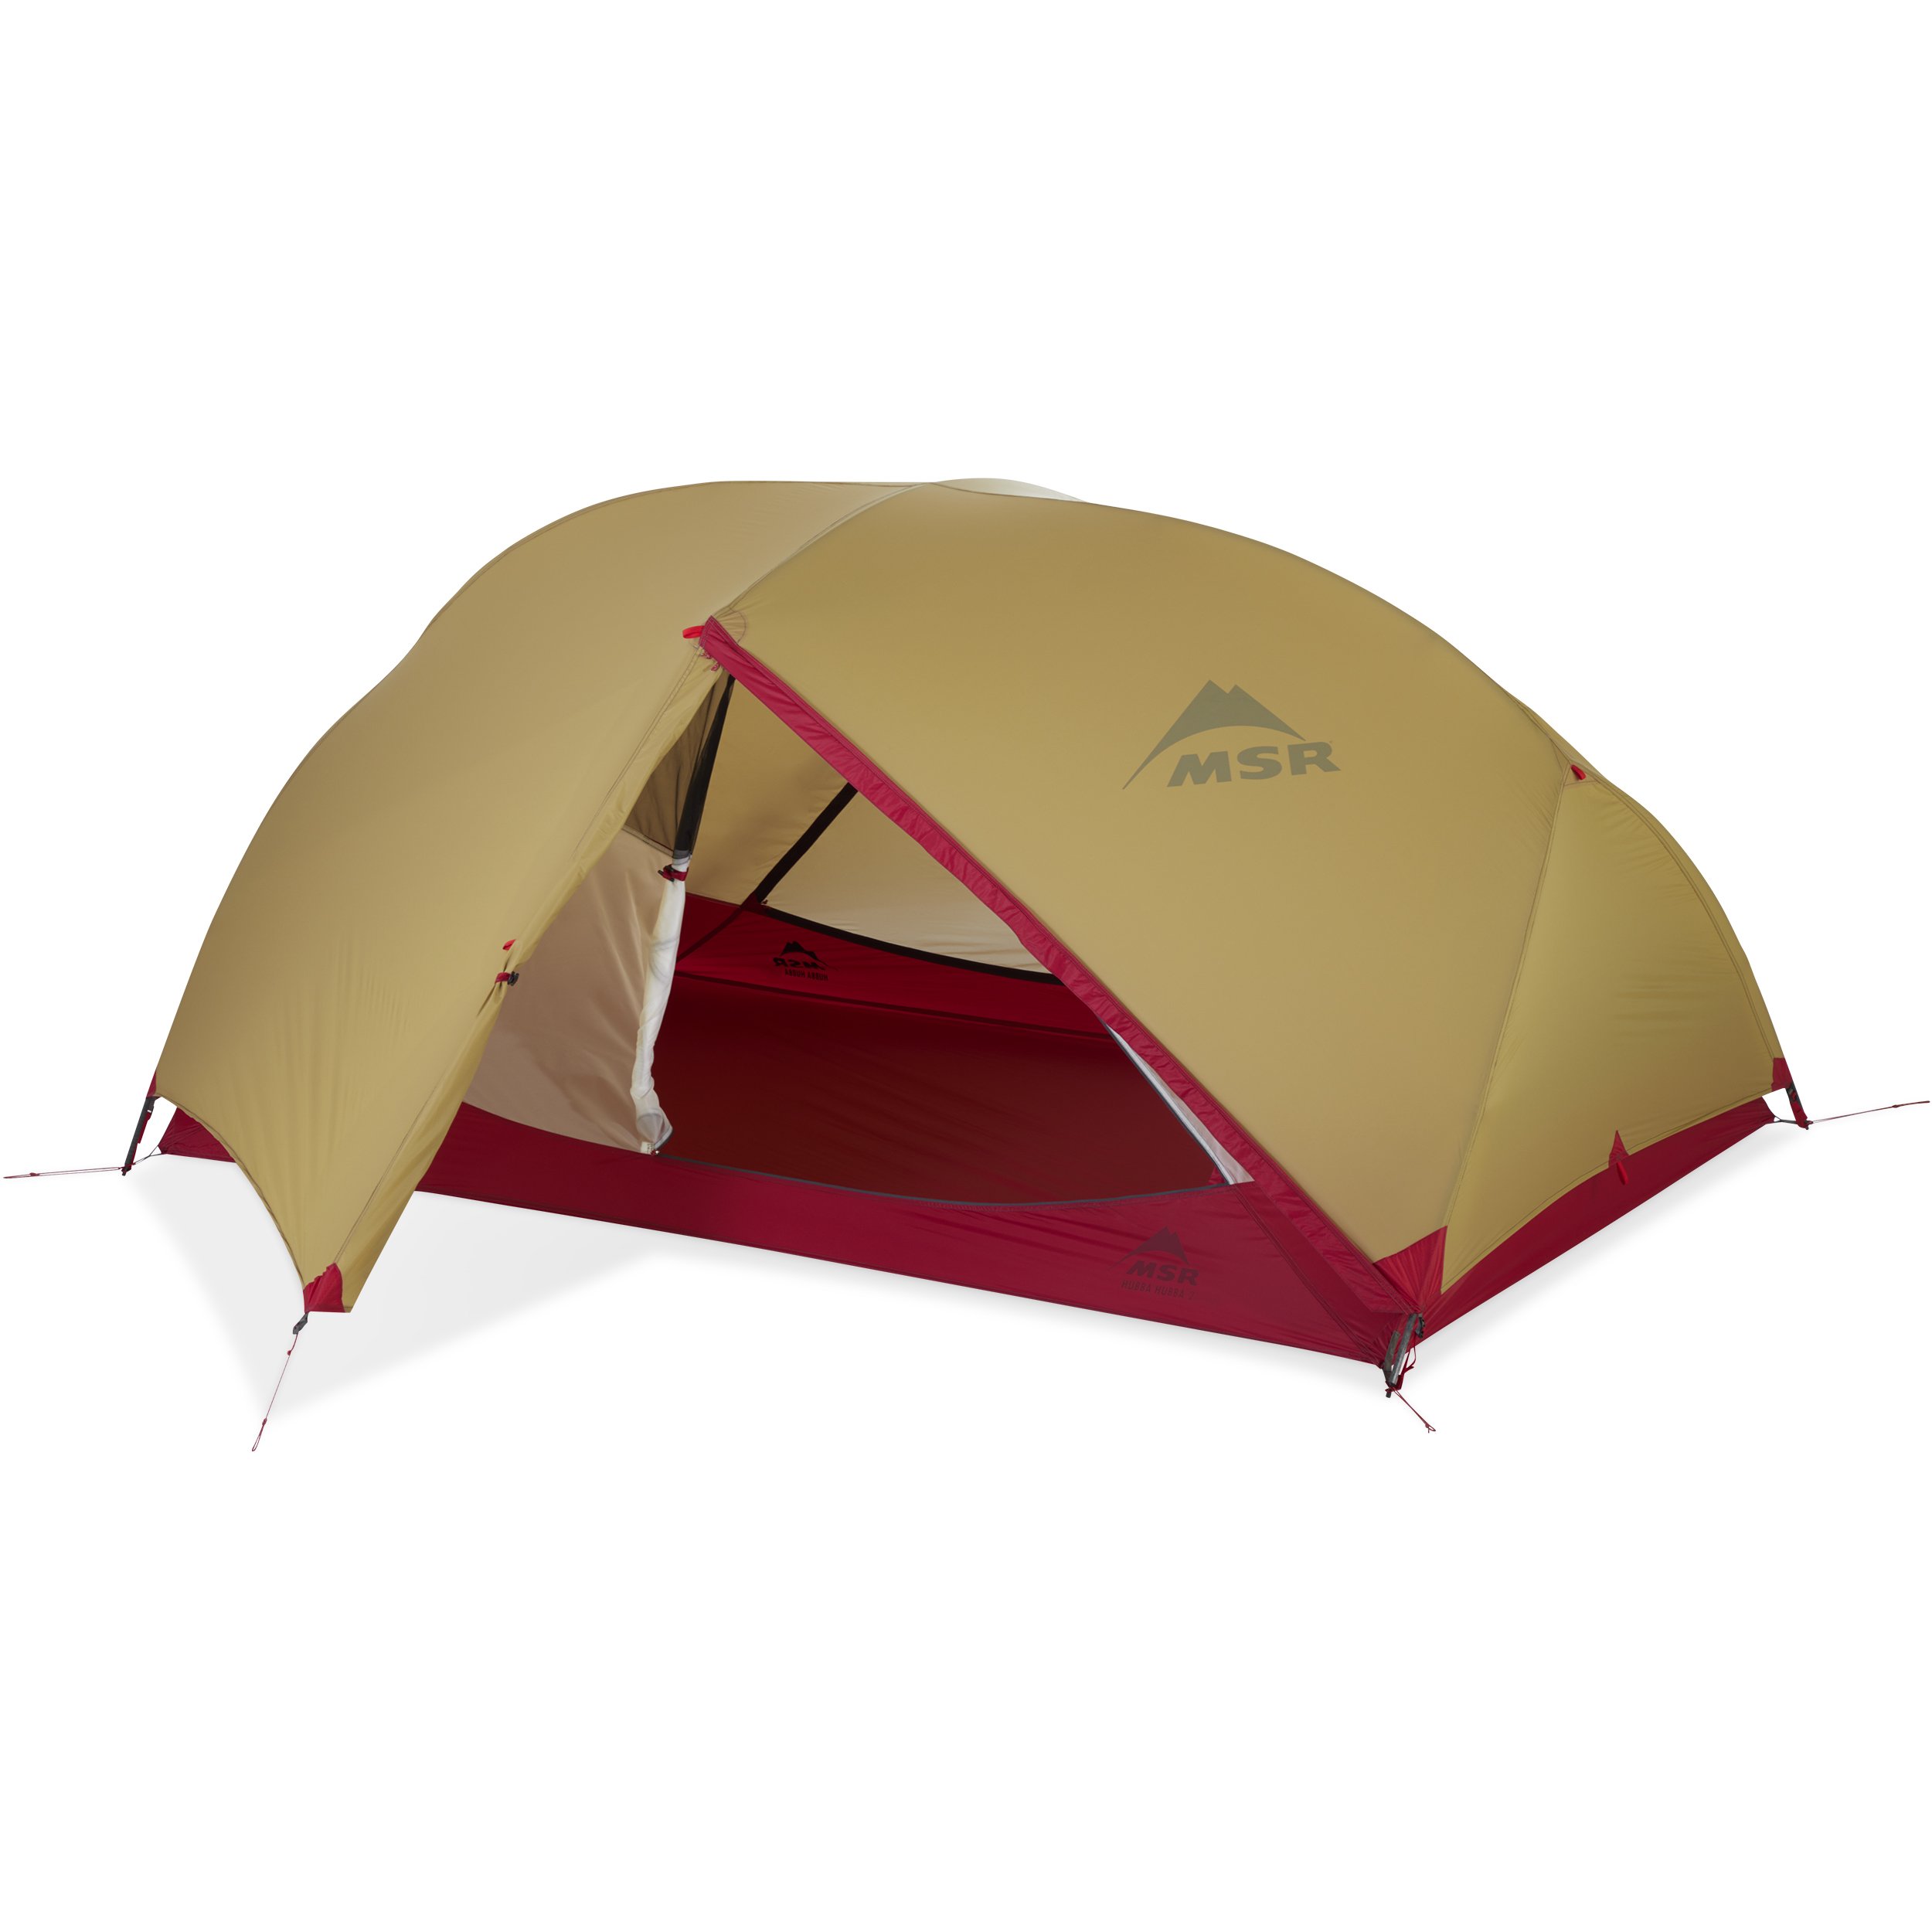 Hubba Hubba™ Legendary 2-Person Backpacking Tent MSR®